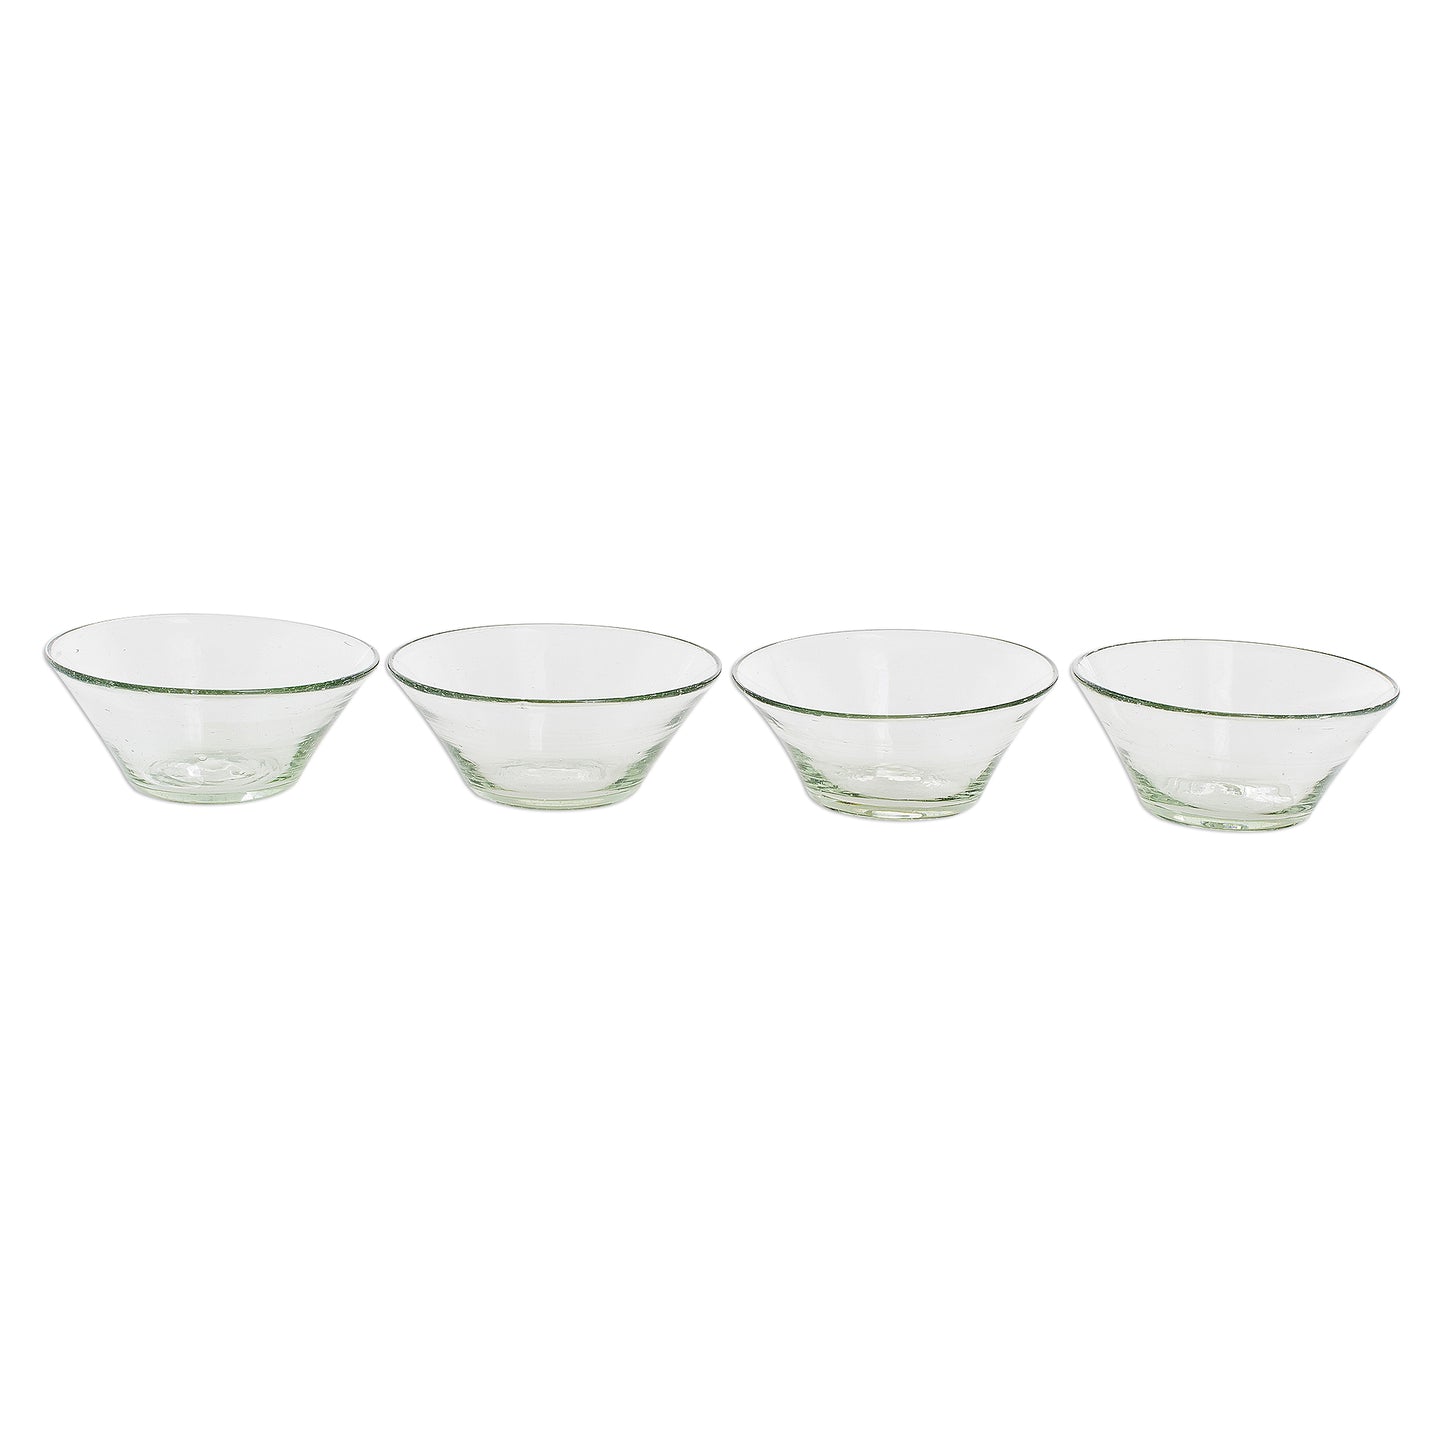 Sweet Moments Recycled Glass Clear Dessert Bowls from Guatemala (Set of 4)